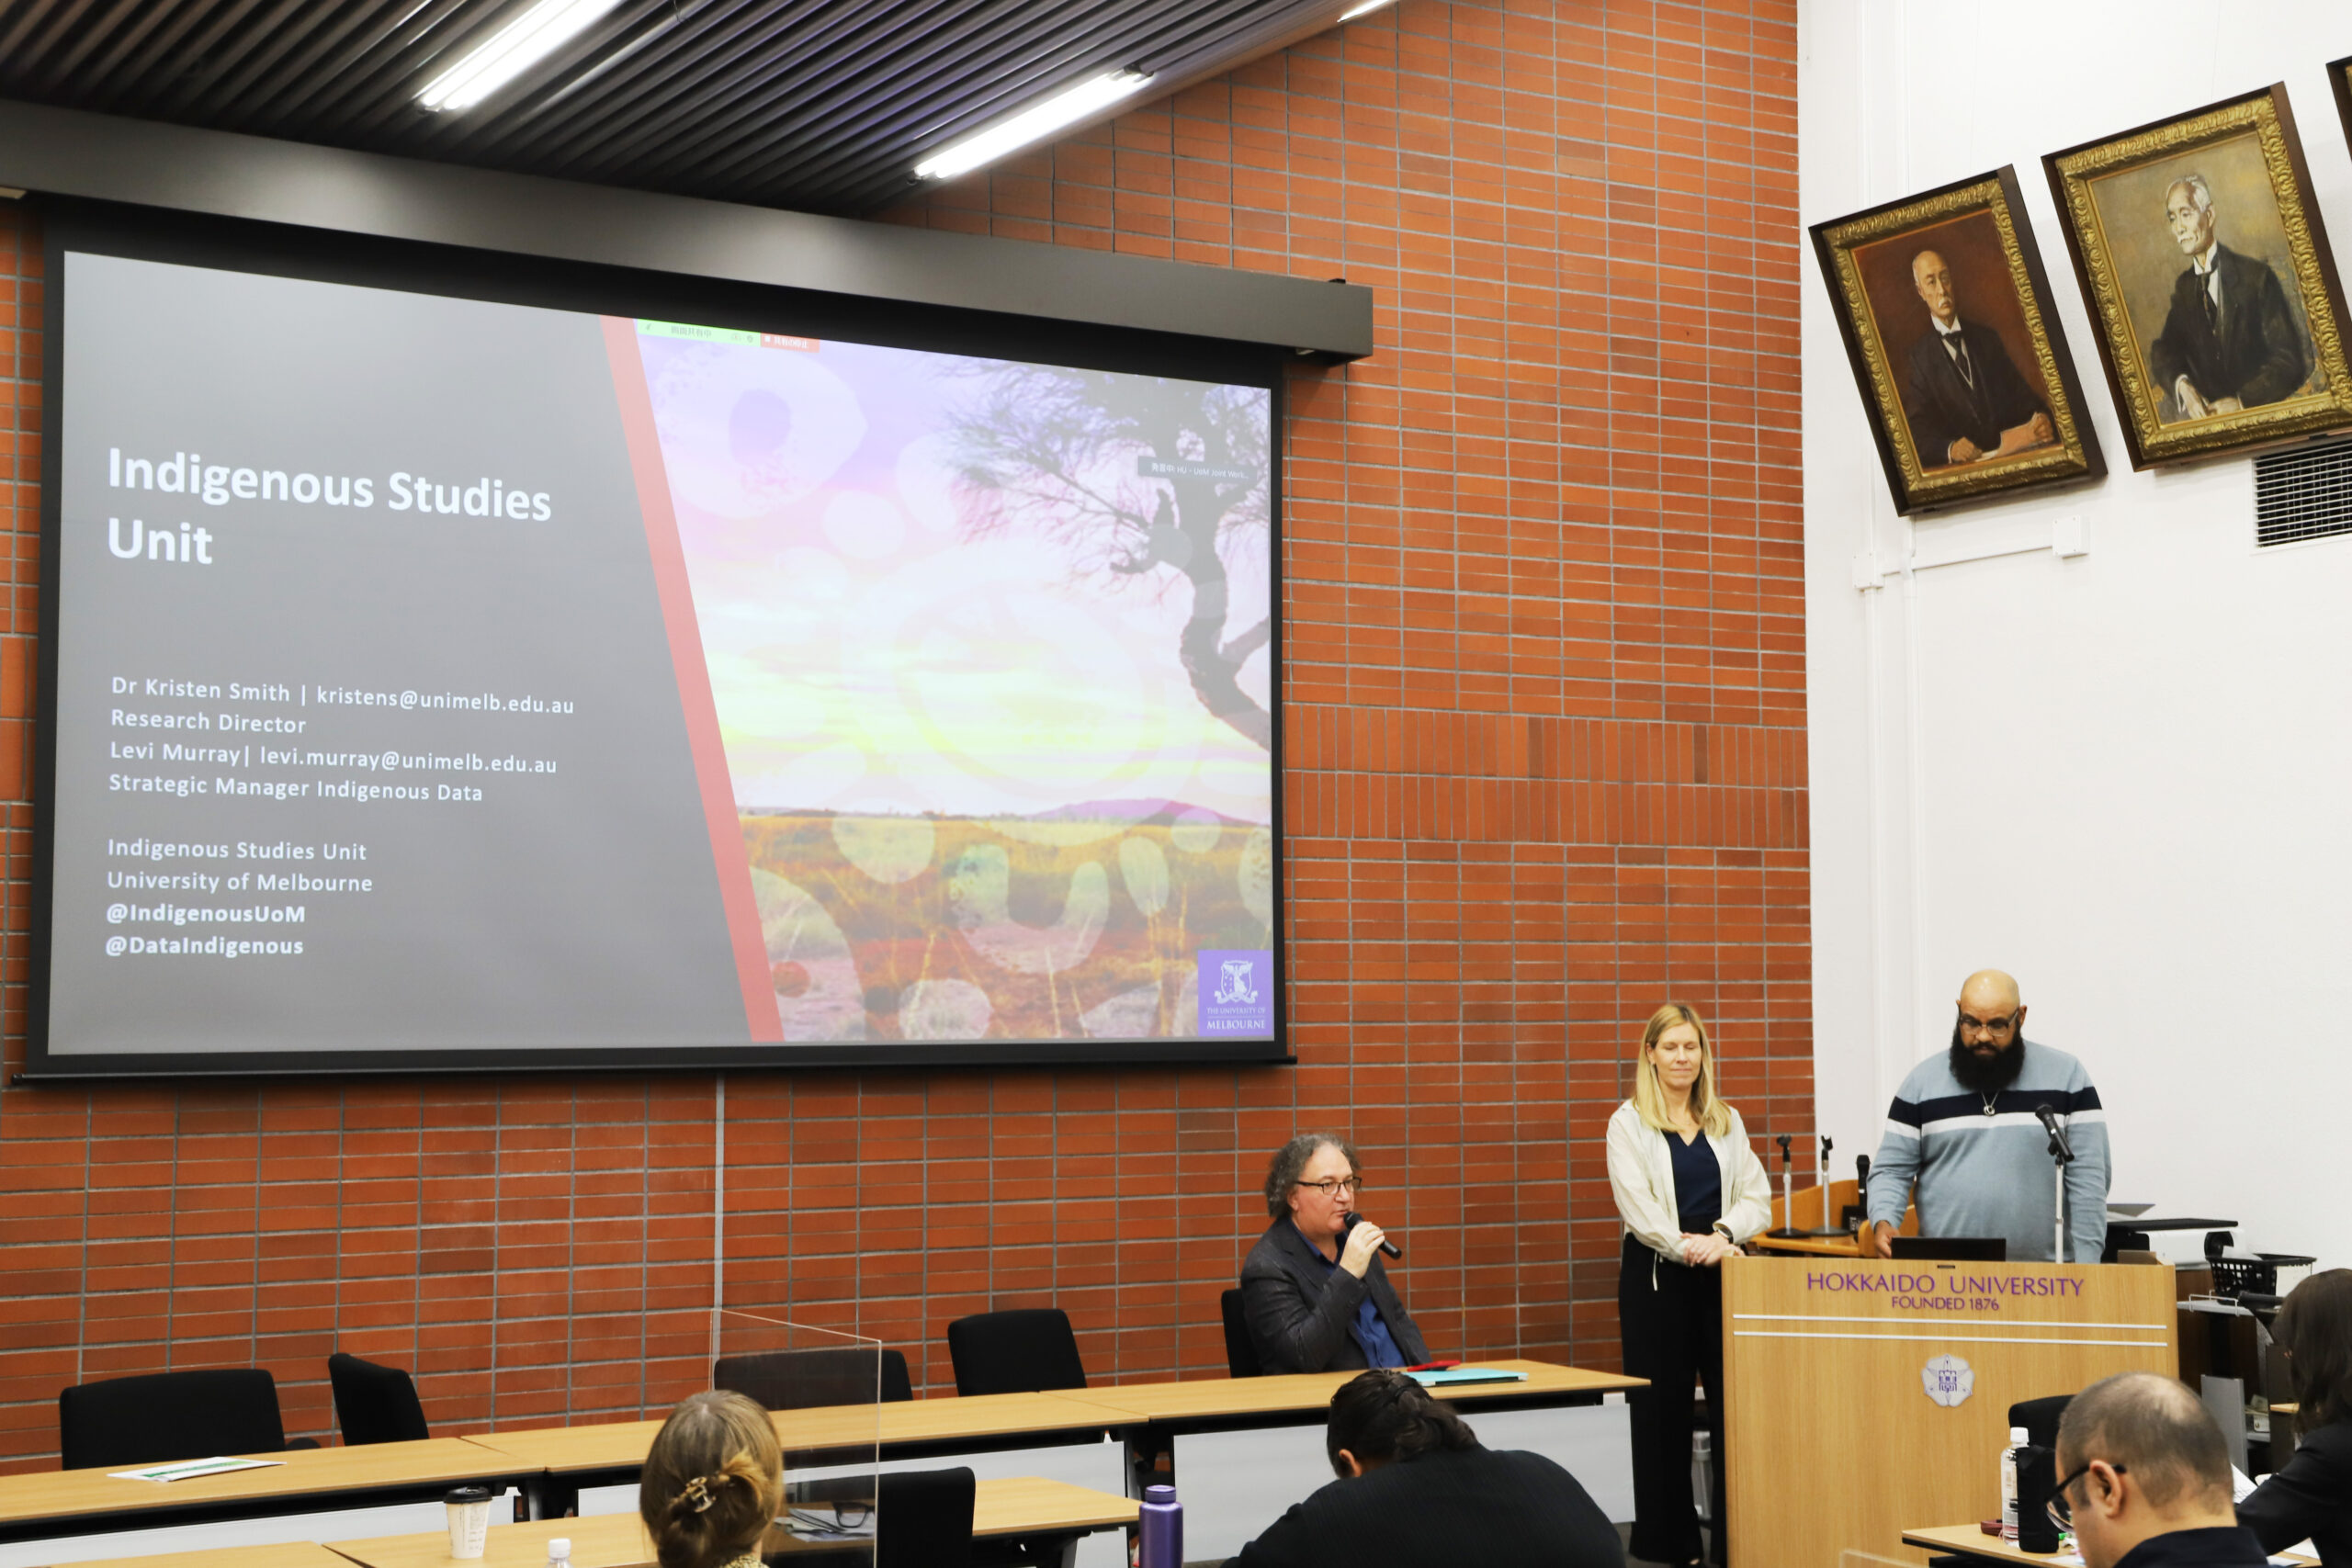 Dr. Kristen Smith and Levi-Craig Murray, the University of Melbourne, introducing the Indigenous Studies Unit.